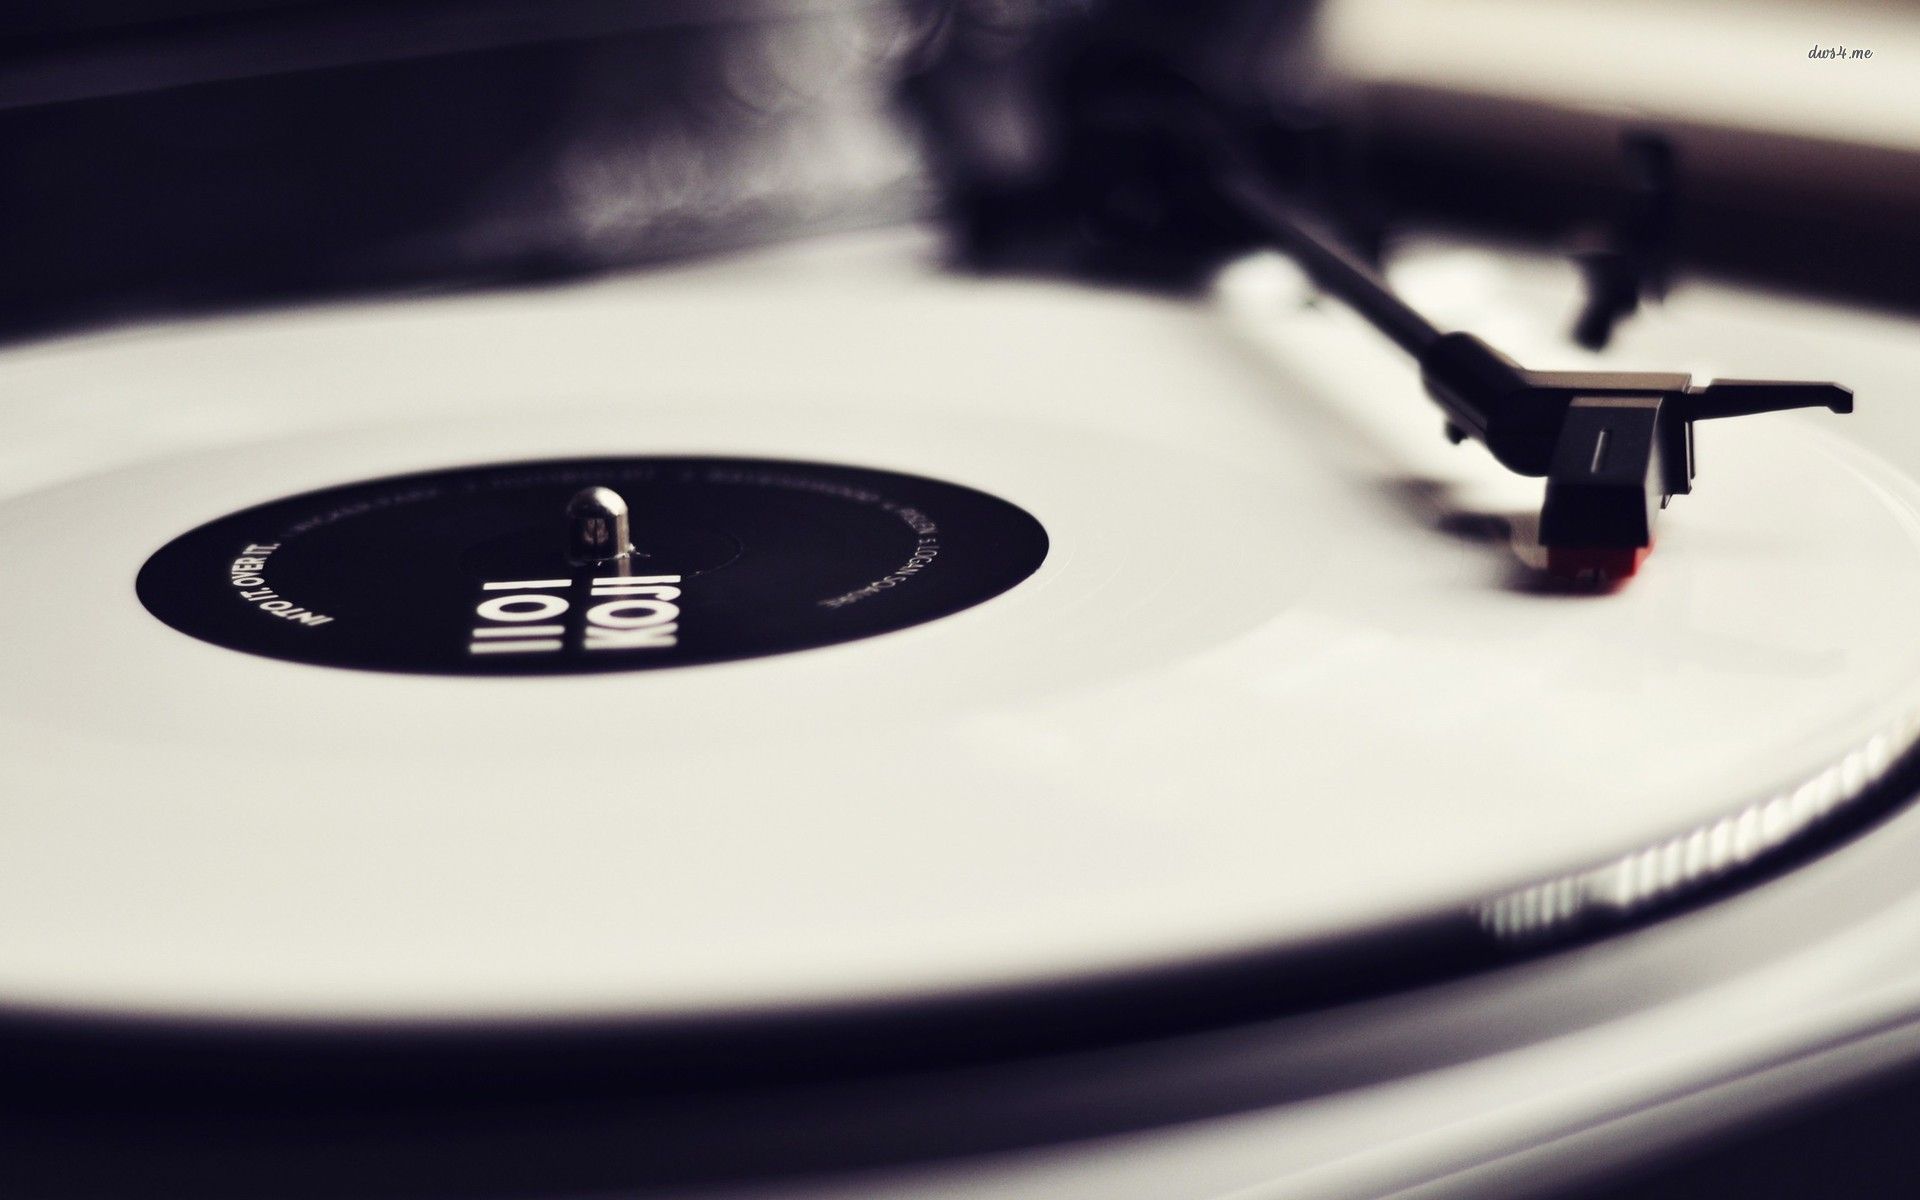 Turntable wallpaper - Music wallpapers - #15736